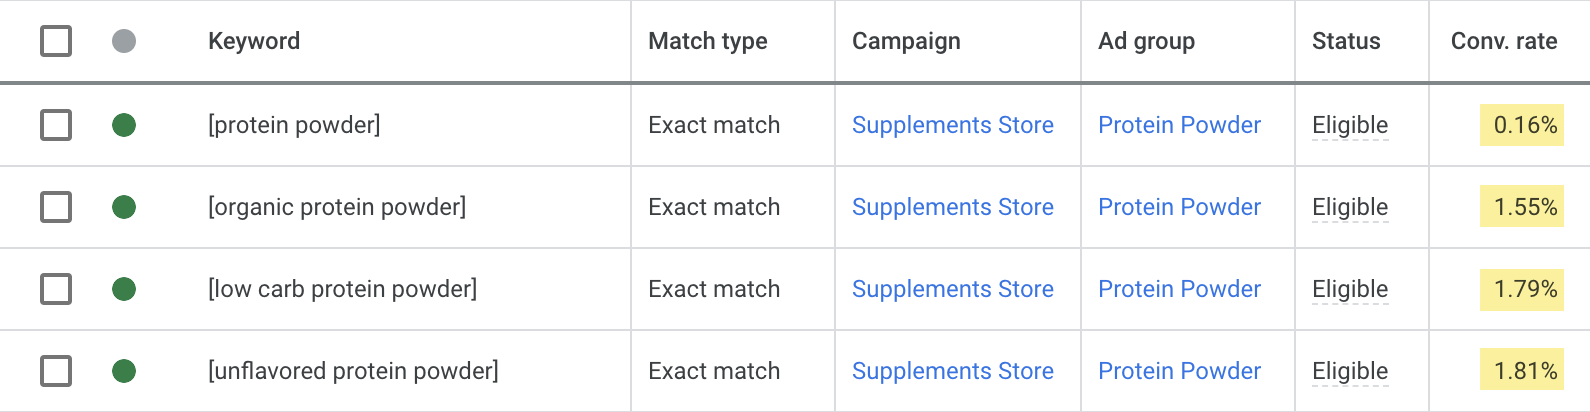 Conversions for Google Ads